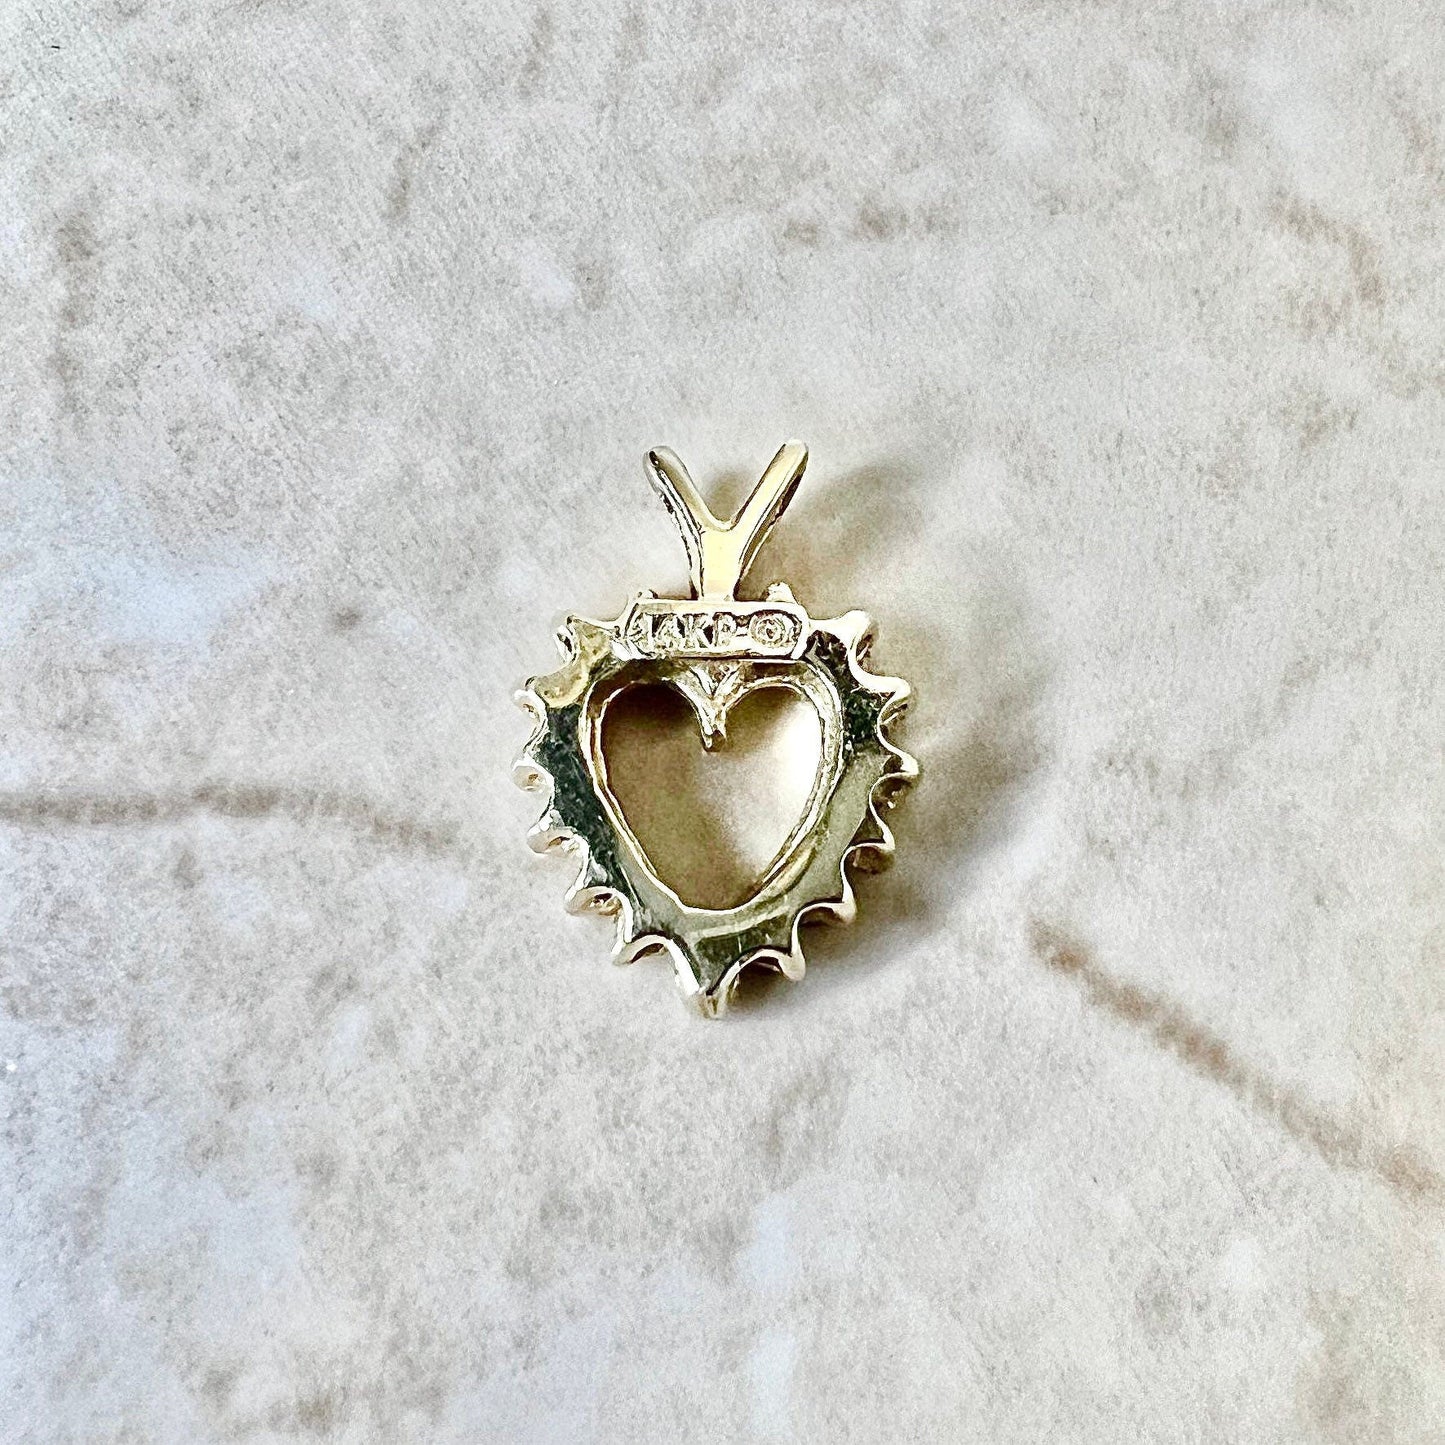 14K Diamond Heart Pendant Necklace - Yellow Gold Diamond Pendant - Heart Necklace - Valentine’s Day Gift For Her - Best Gifts For Her